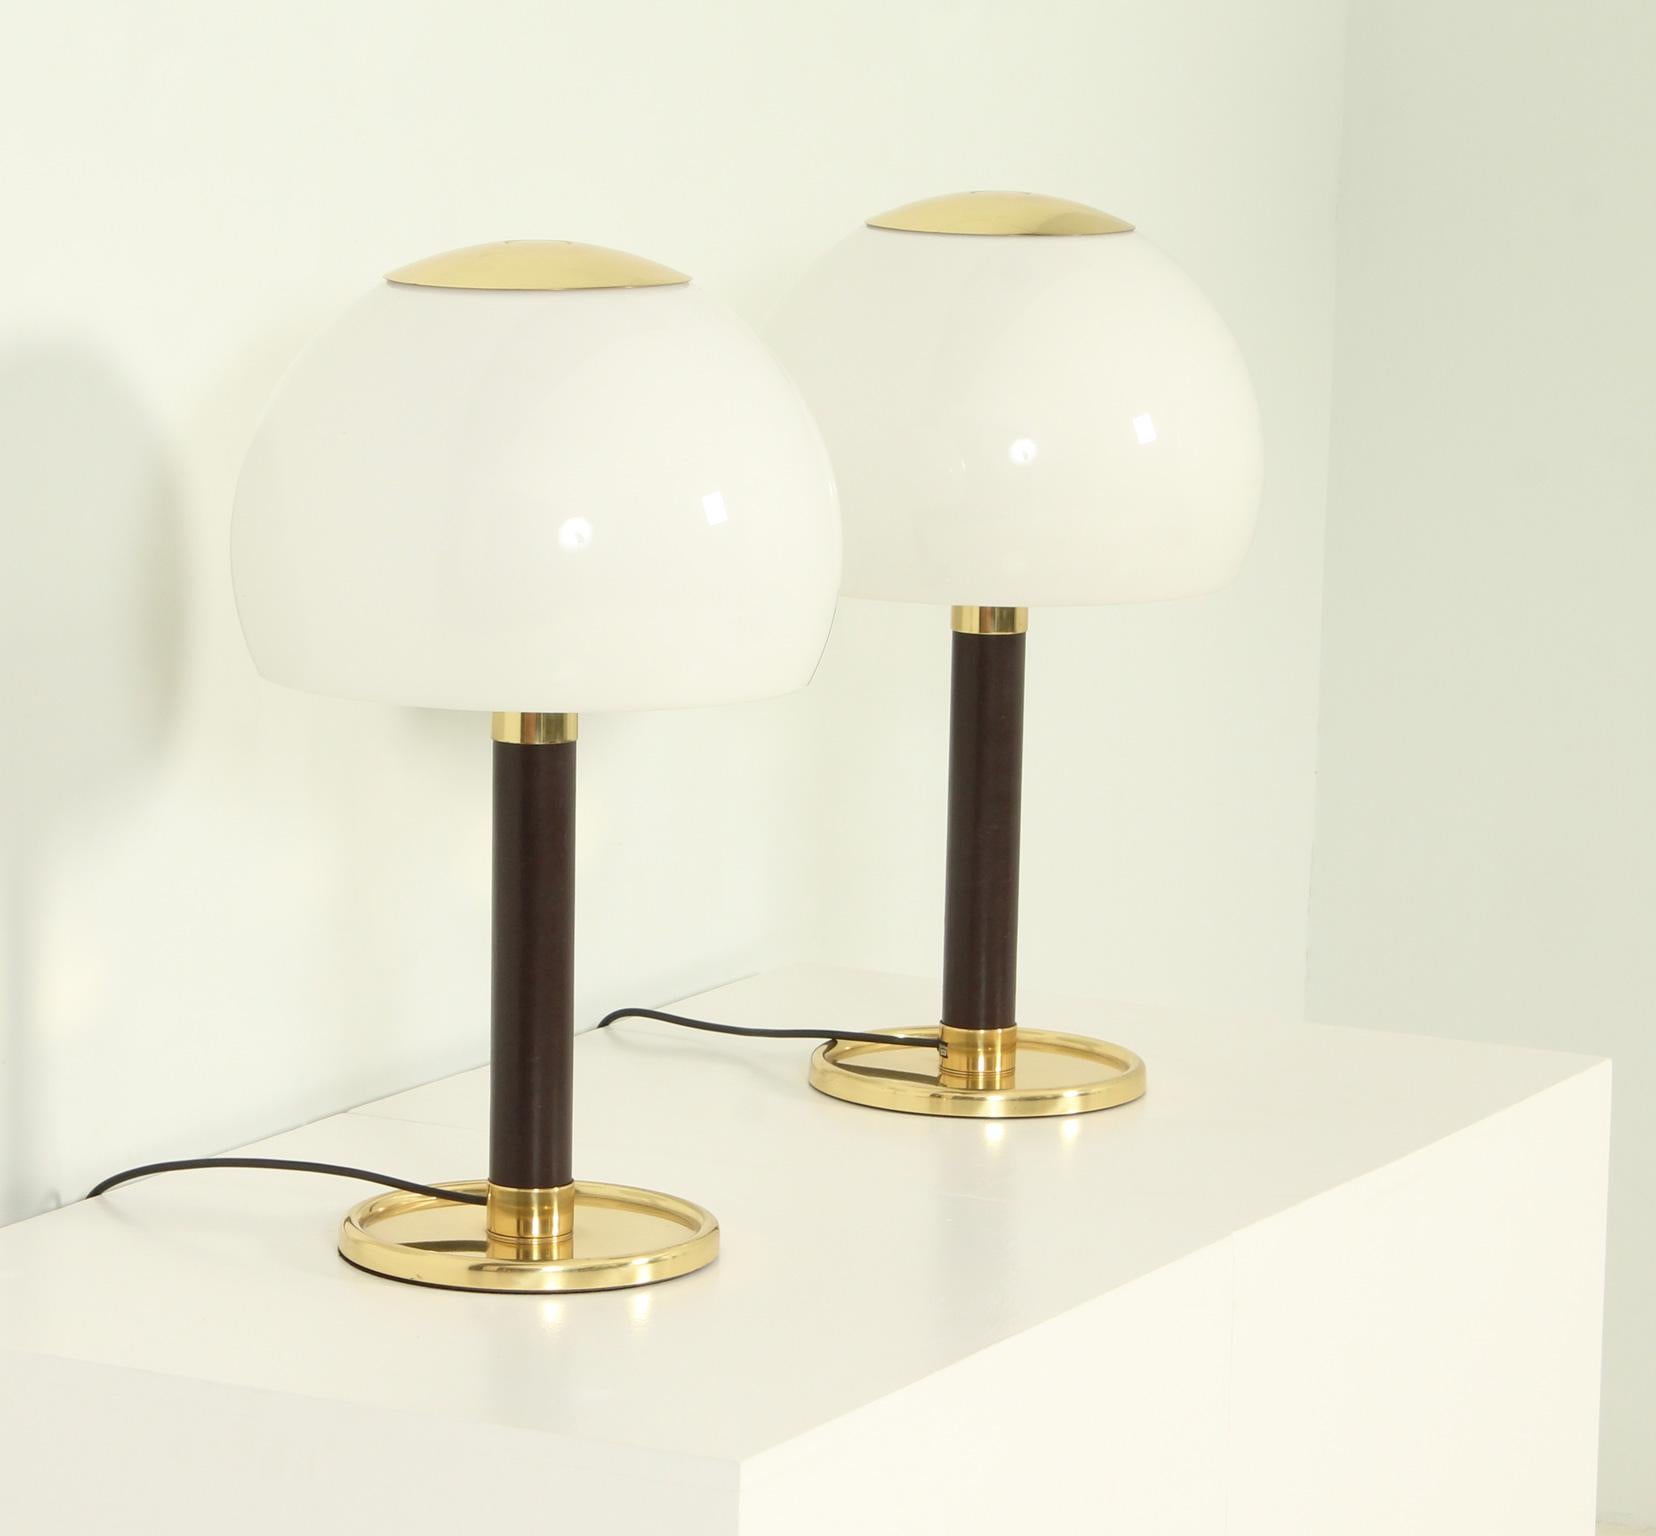 Pair of table lamps designed in 1970's by the italian designer Gaetano Scolari for the spanish company Metalarte. Opal methacrylate diffuser, leather stem and brass. Signed and documented.